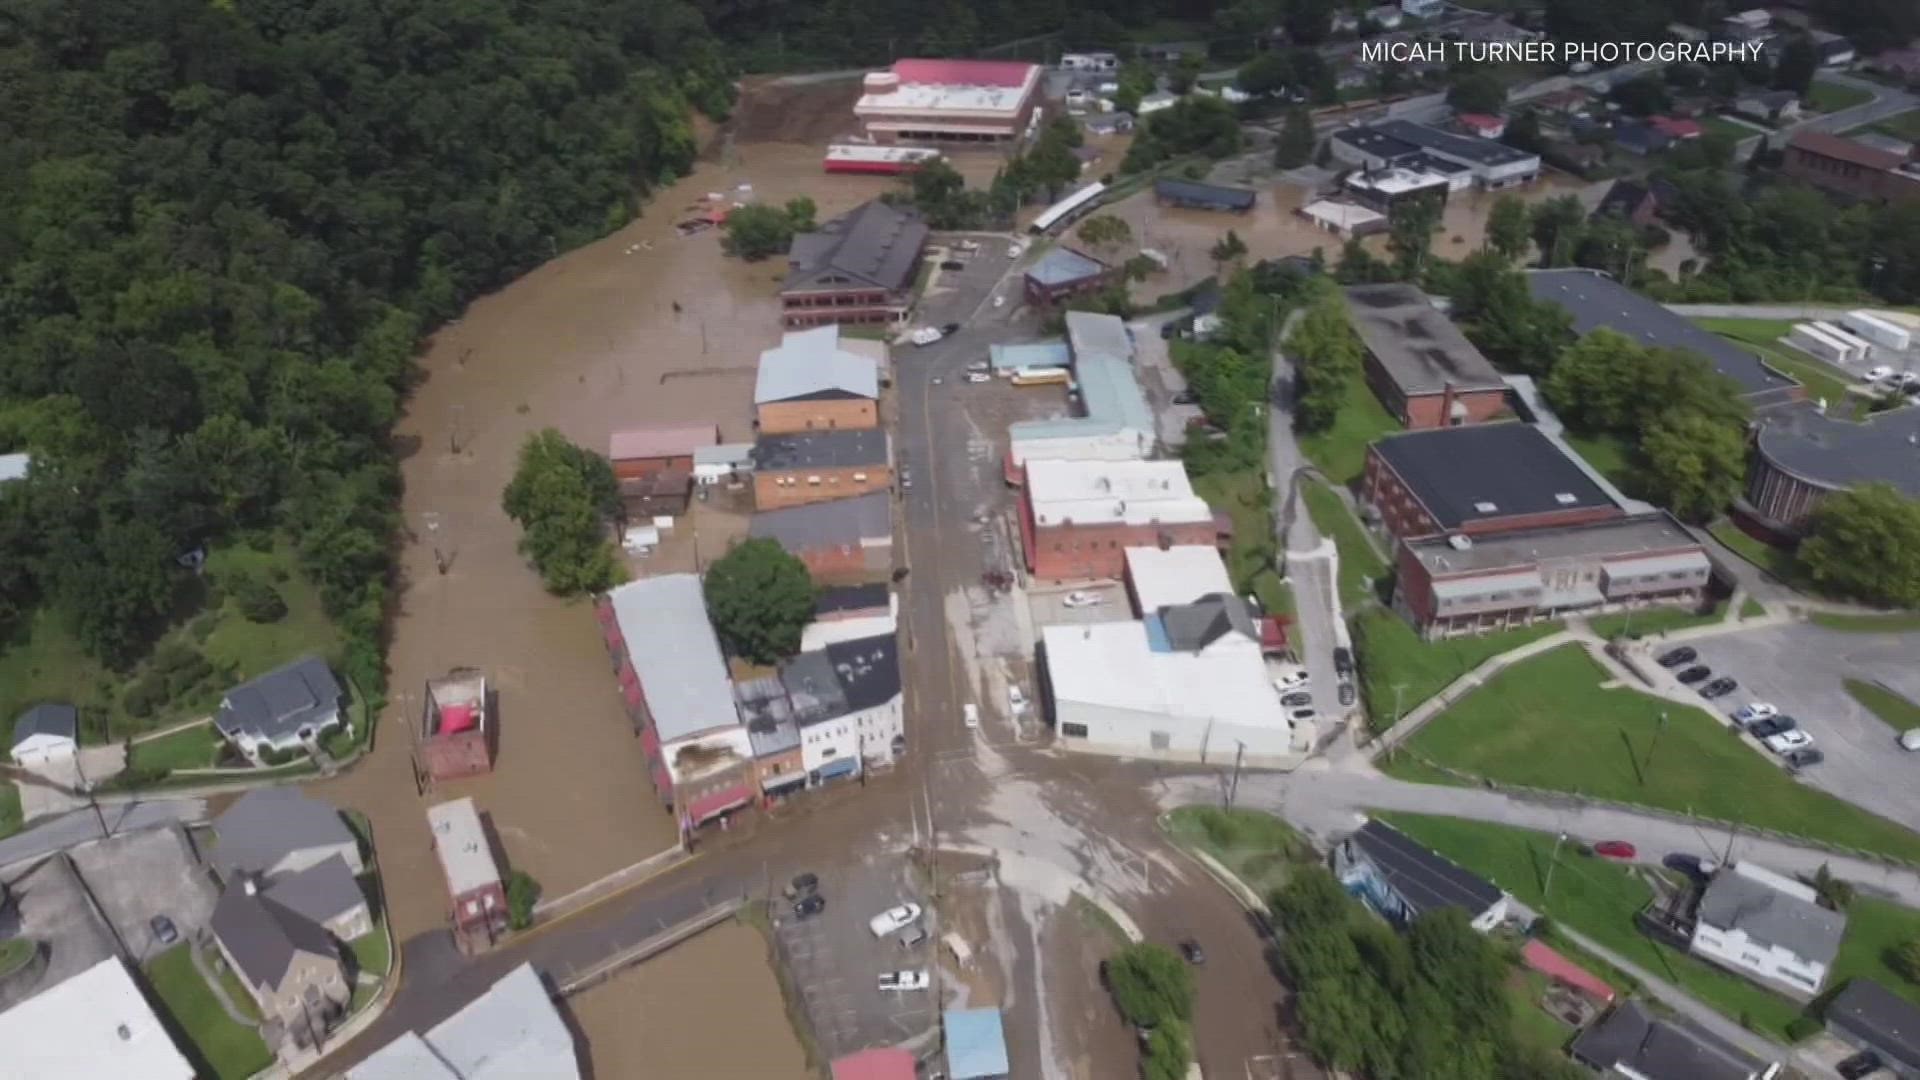 Rescuers faced challenging conditions to reach stranded Kentuckians.